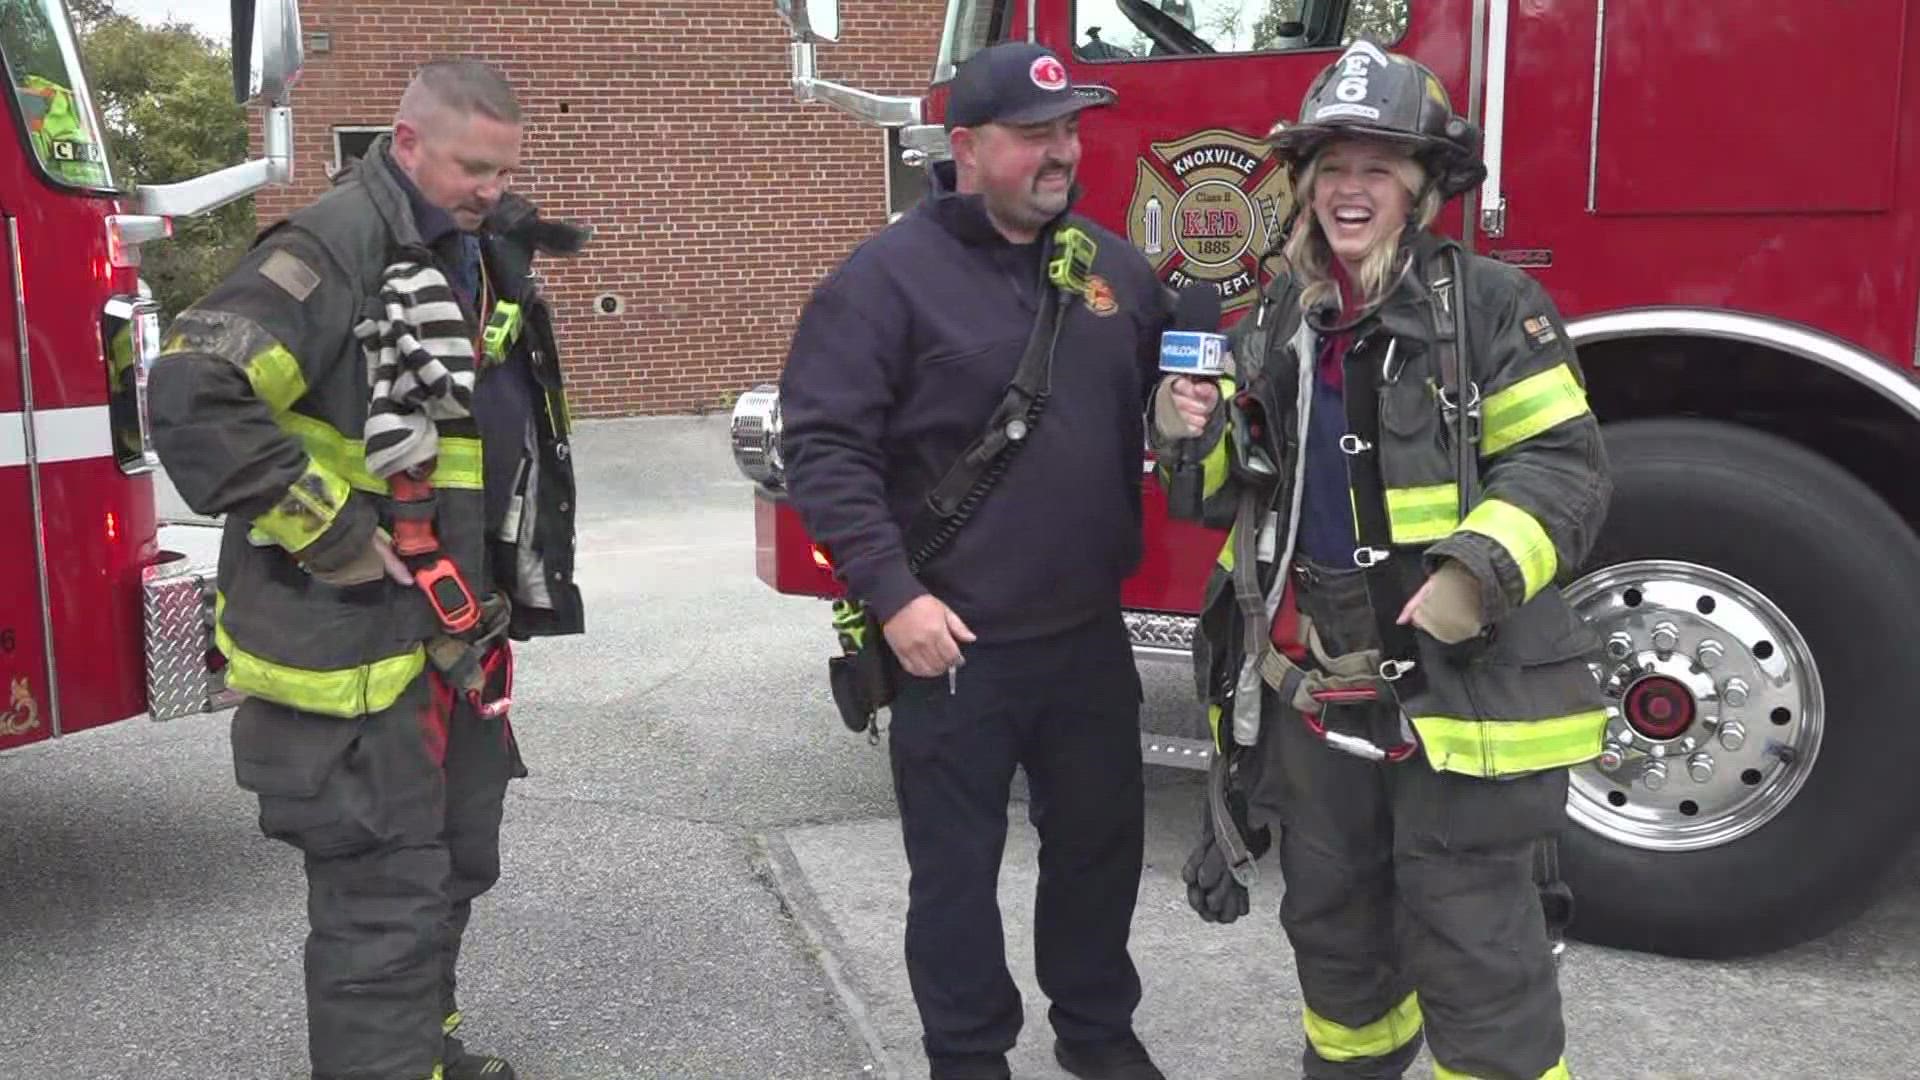 Kaitlyn Keenehan got first hand experience in what it takes to be a firefighter.